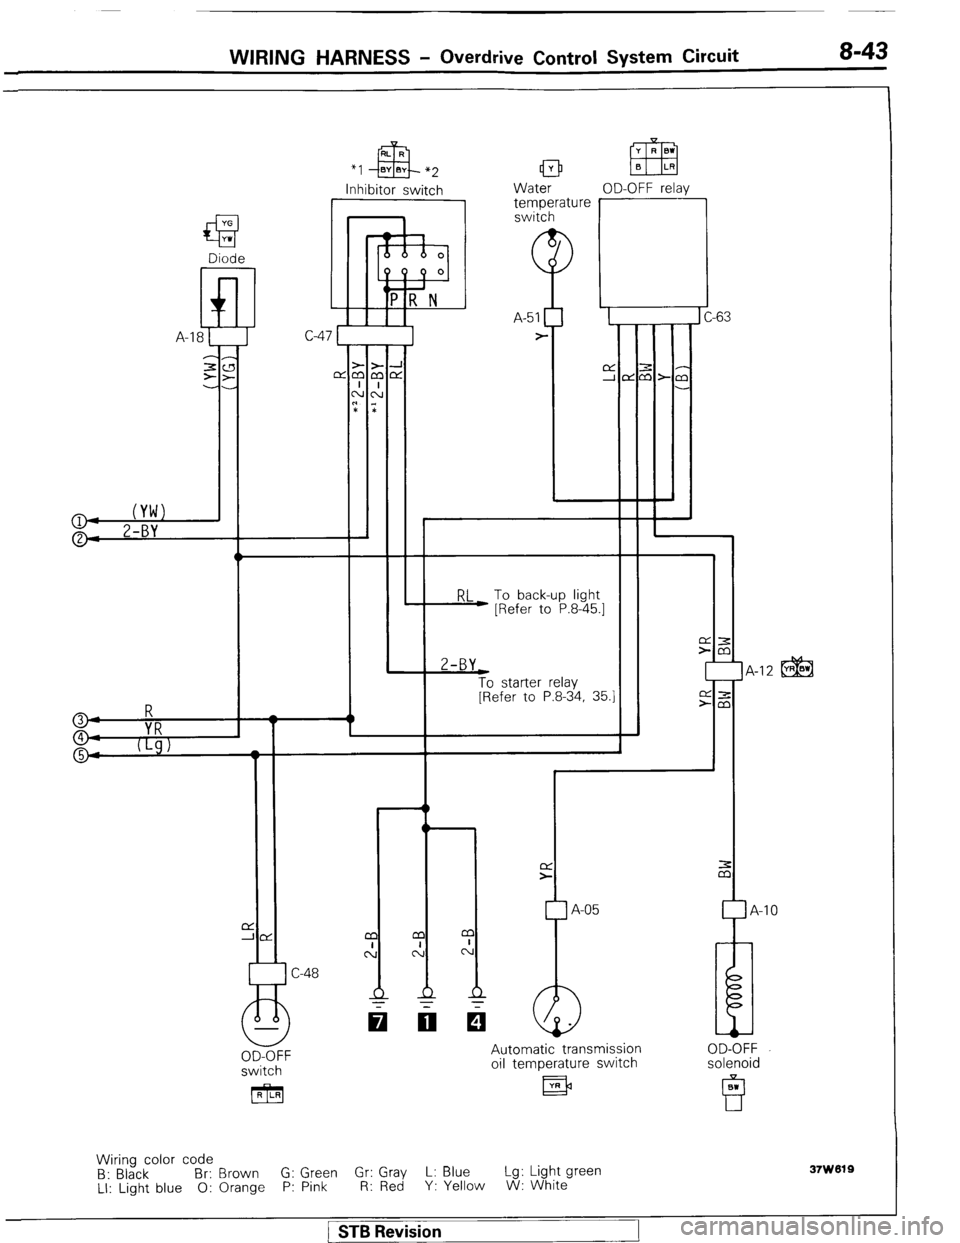 MITSUBISHI MONTERO 1987 1.G Workshop Manual WIRING HARNESS - Overdrive Control System Circuit 8-43 
*I 
Inhibitor switch 
I Water OD-OFF relav 1 temperature r -63  C- 
RL To back-up light 
) [Refer to P.8-45.1 2-BY 
t 
To starter relay 
[Refer 